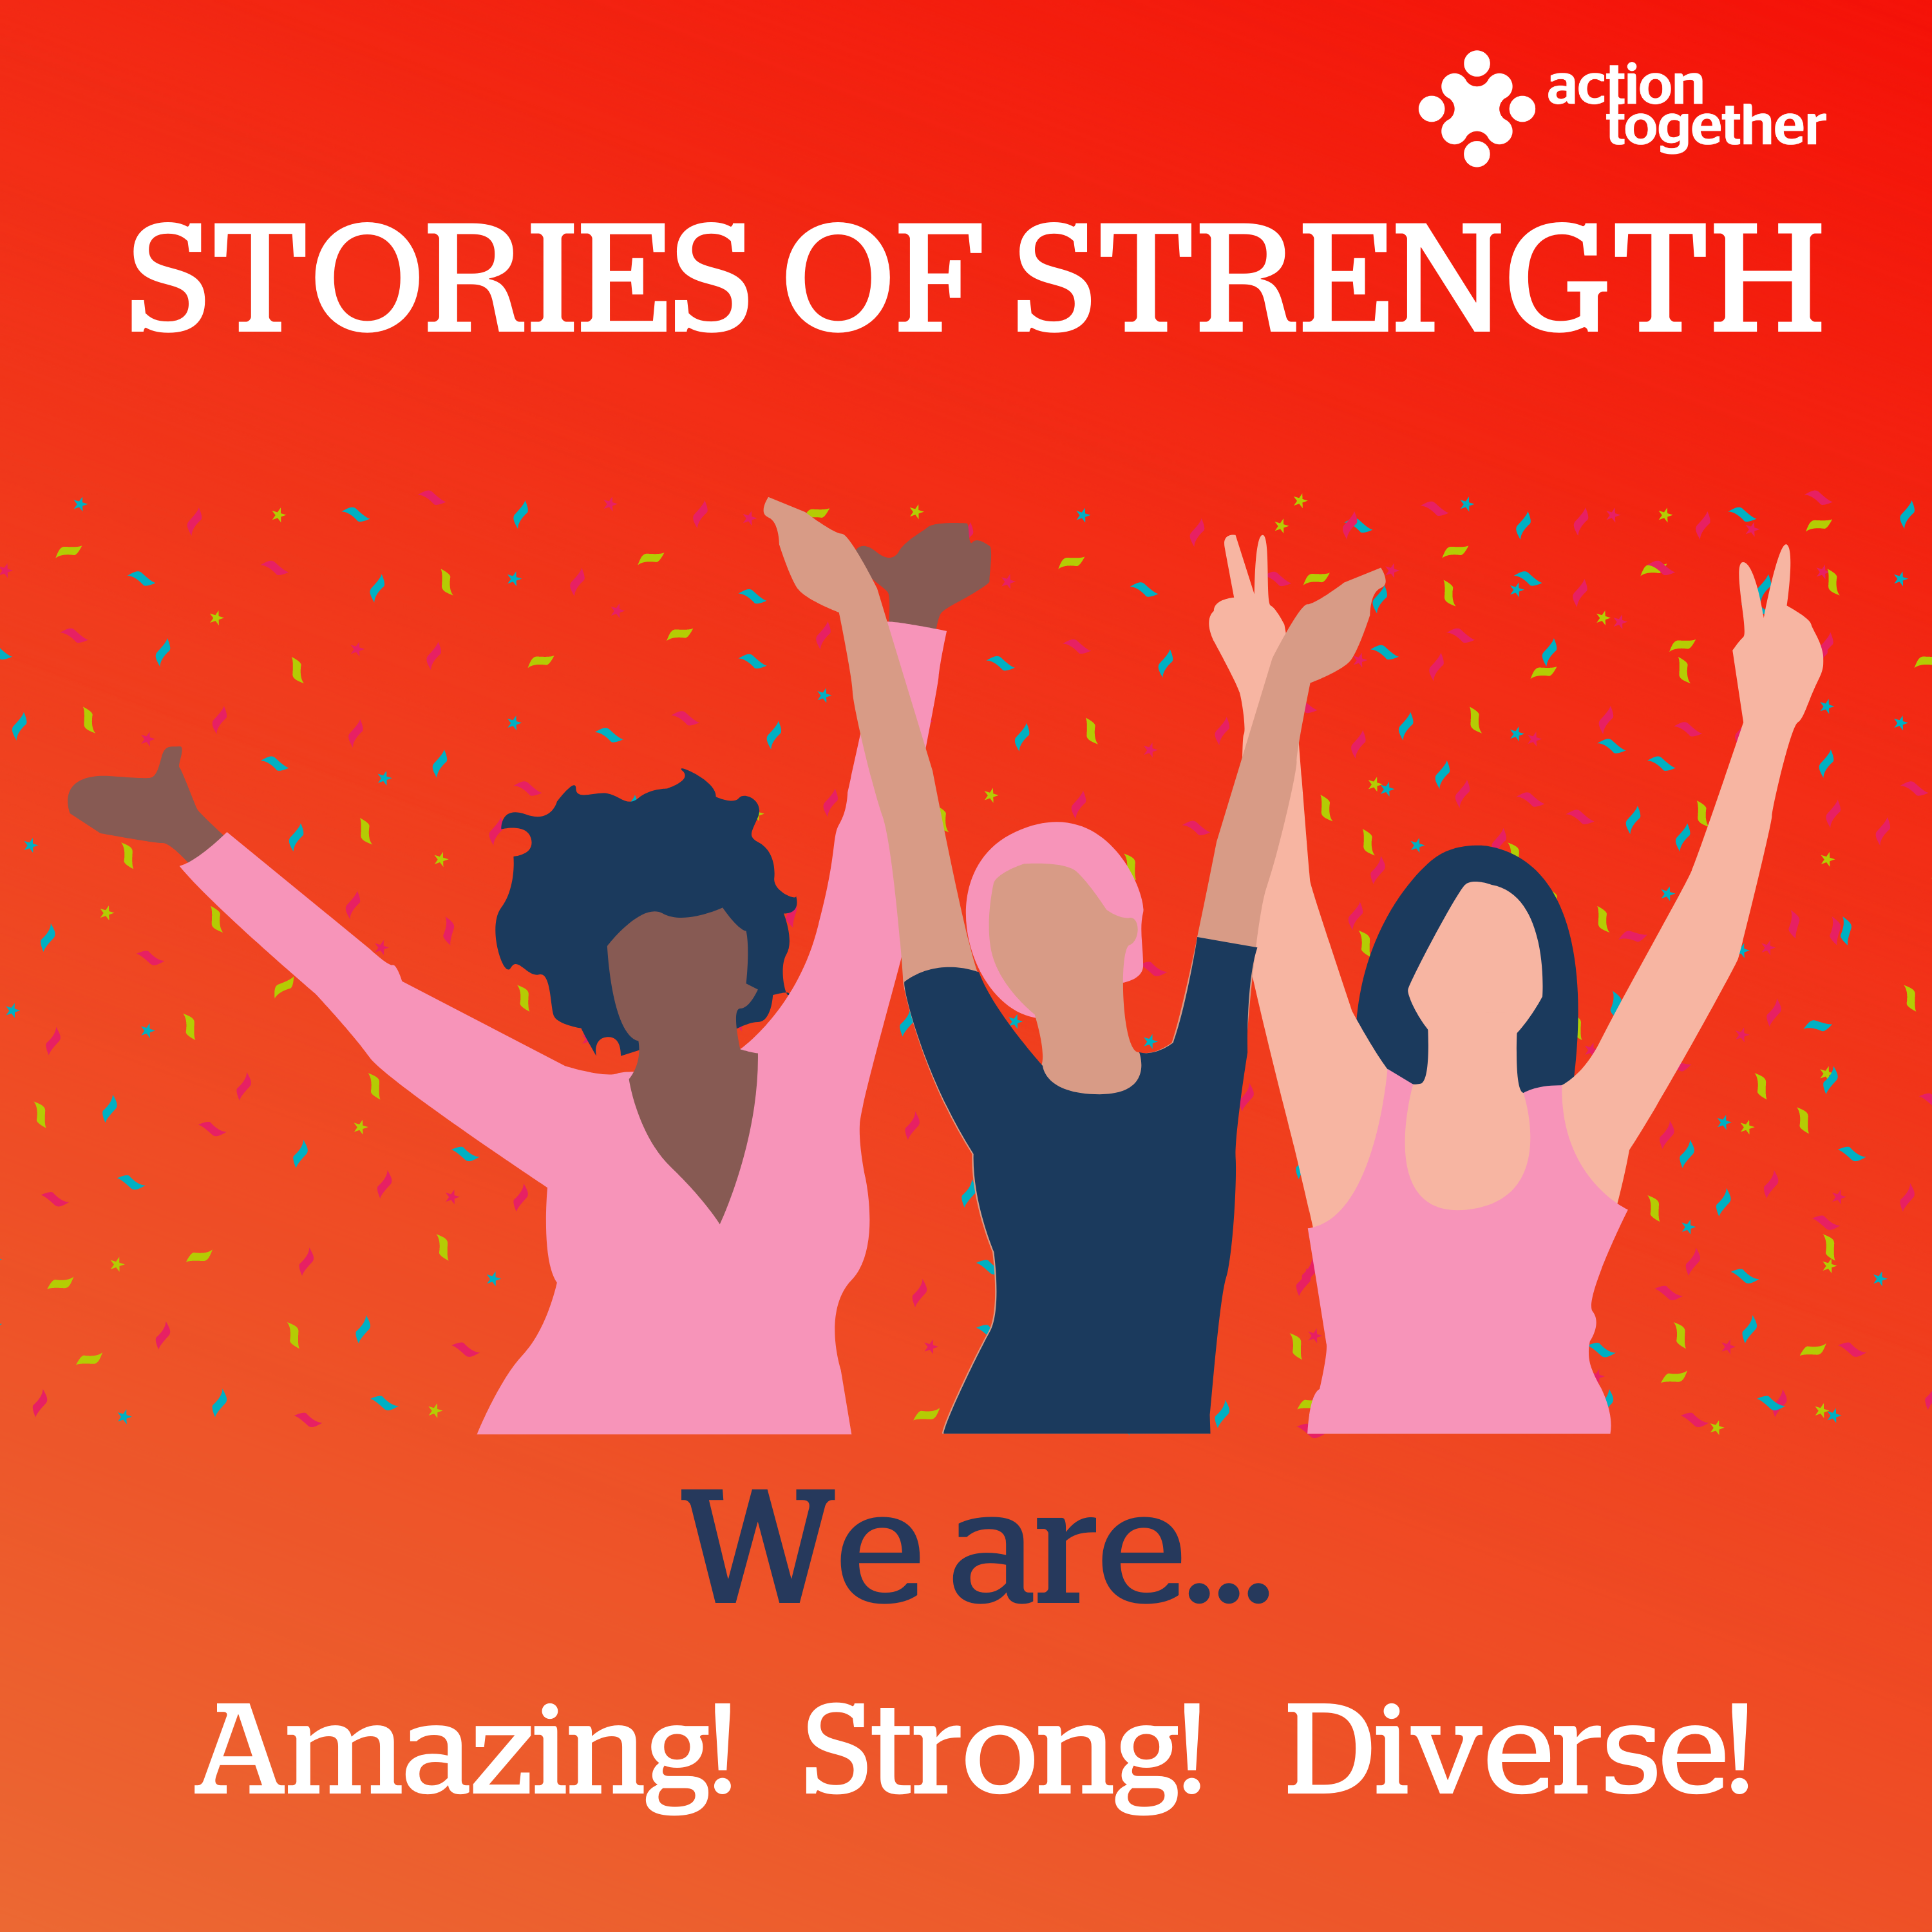 This image is of a podcast called stories of strength on the cover their is 3 people and the text reads we are amazing strong diverse